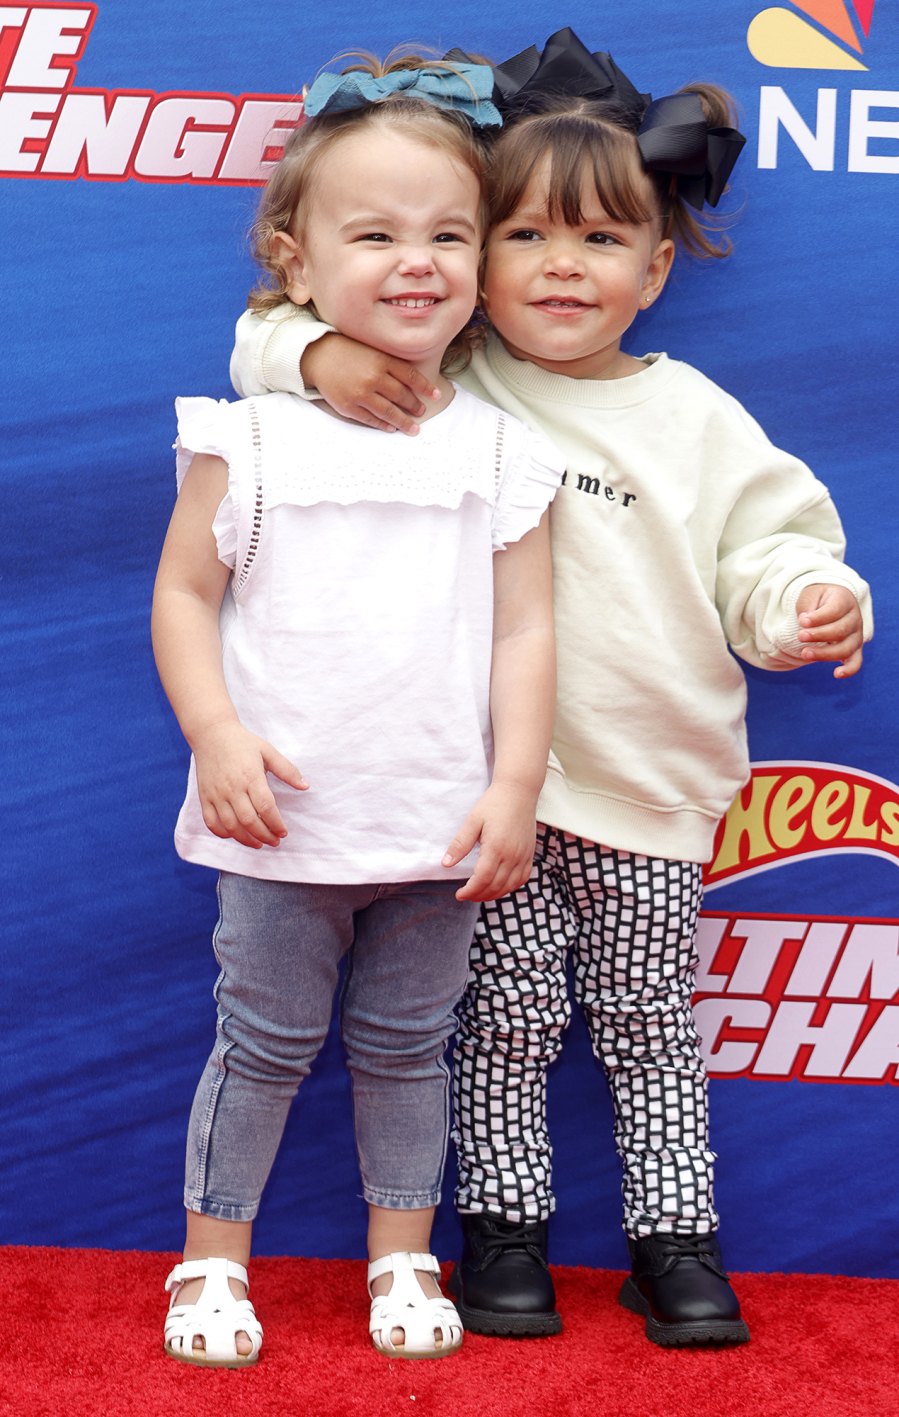 ‘Vanderpump Rules’ Stars Walk The Hot Wheels Ultimate Challenge Red Carpet With Their Kids: Photos